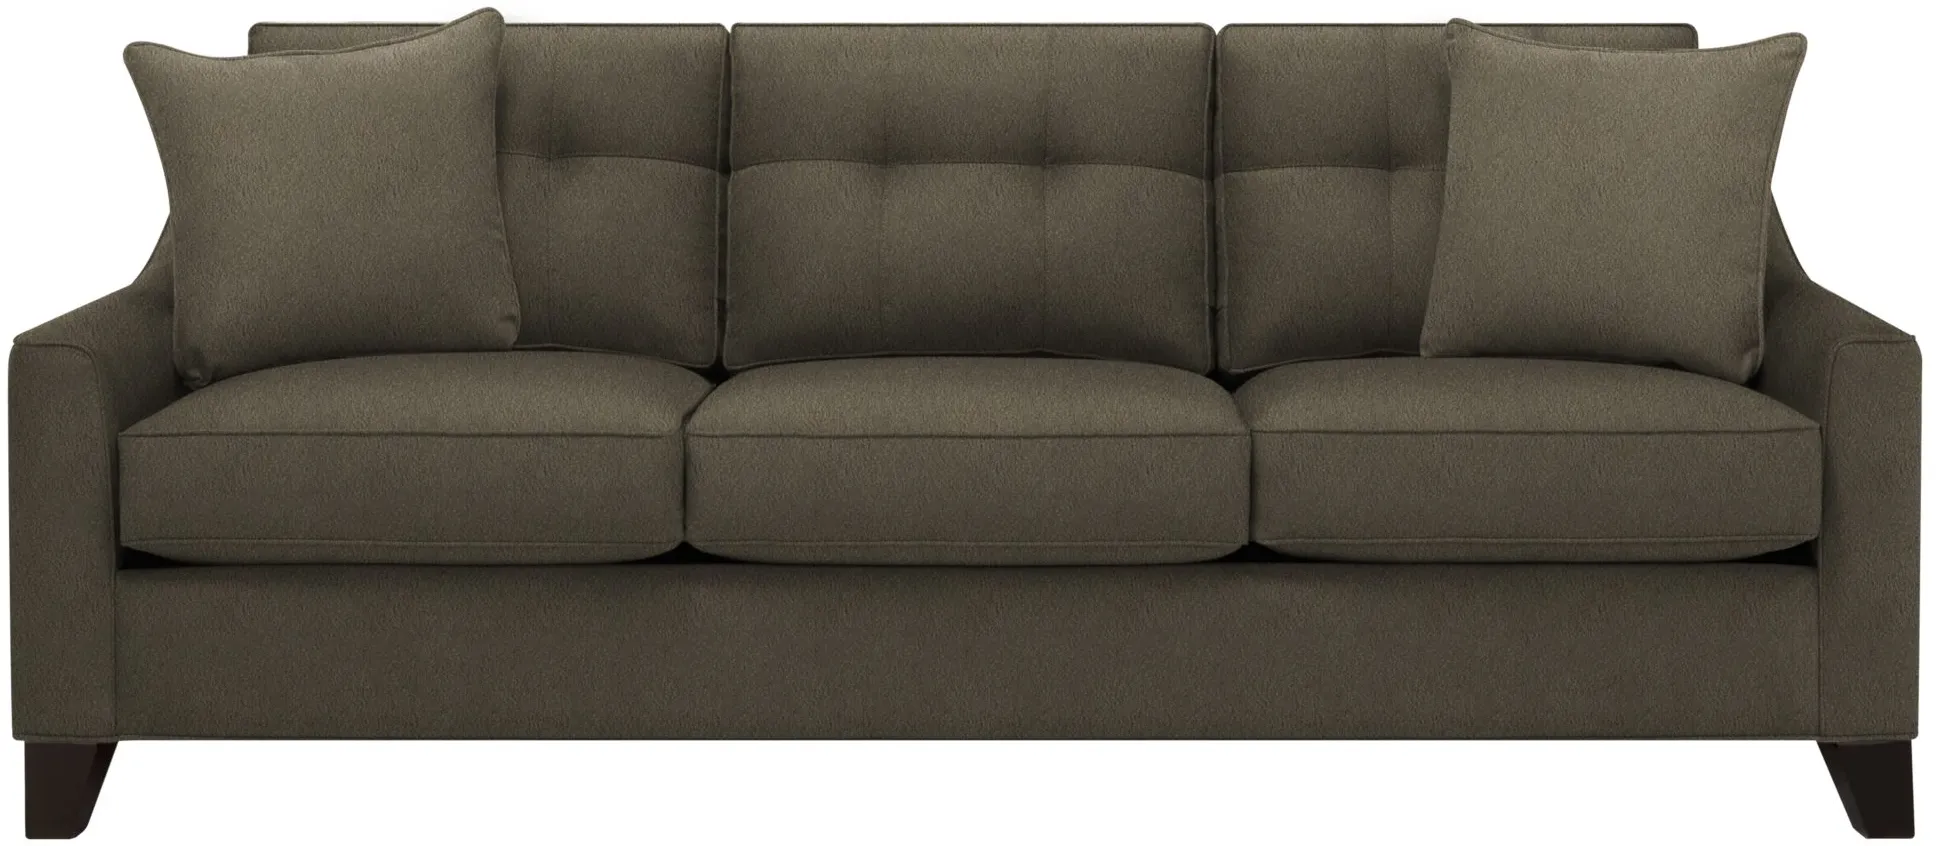 Carmine Sofa in Suede So Soft Graystone by H.M. Richards